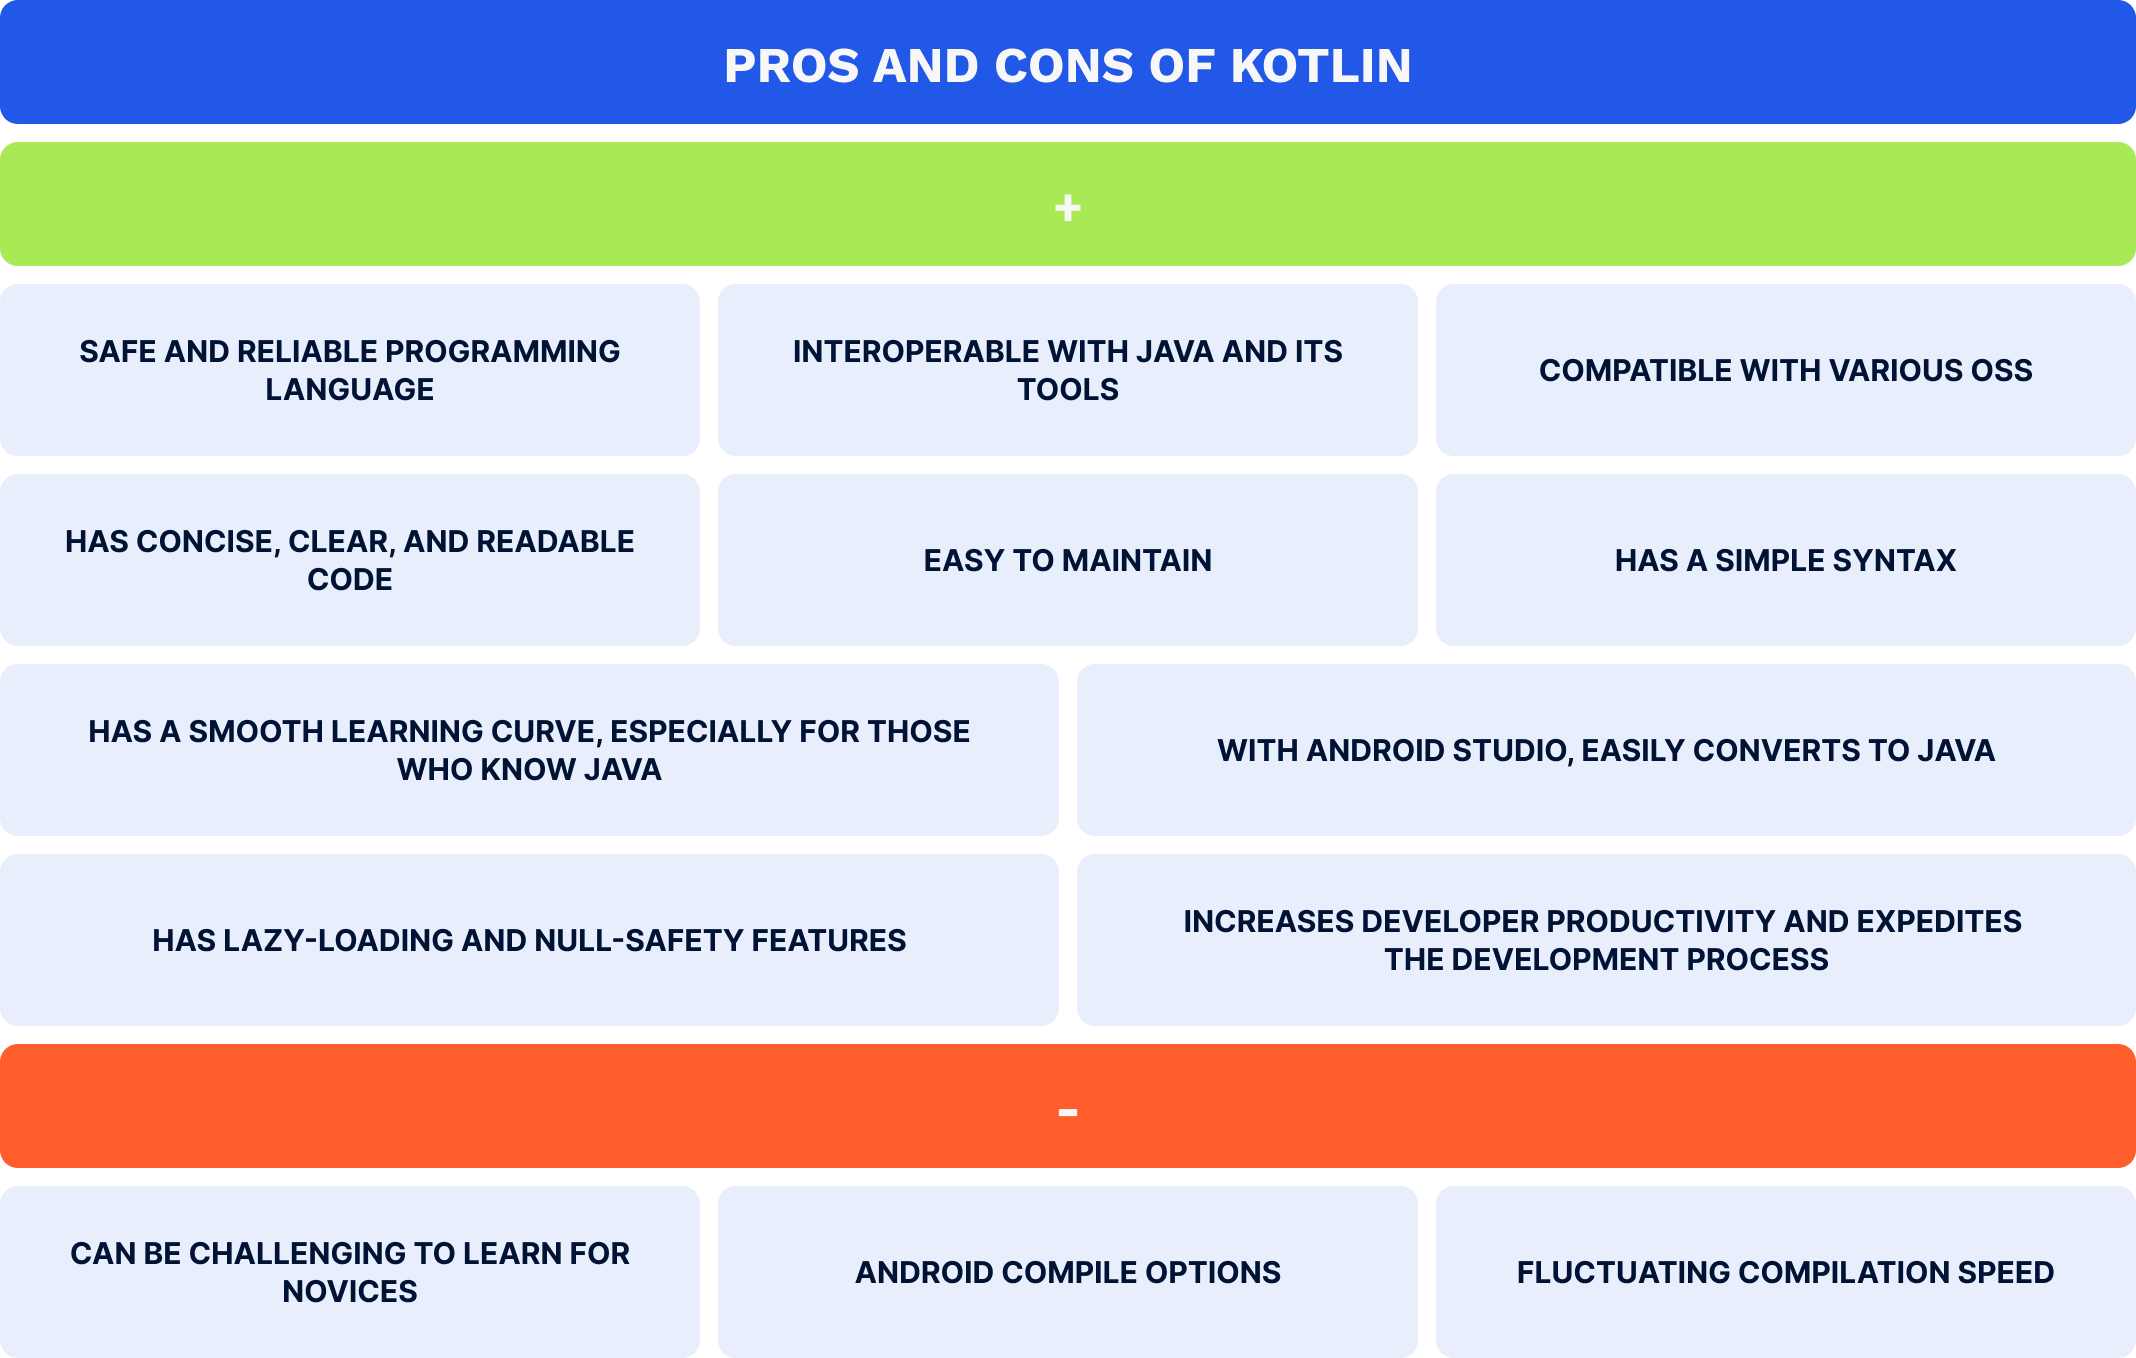 Pros and cons of Kotlin